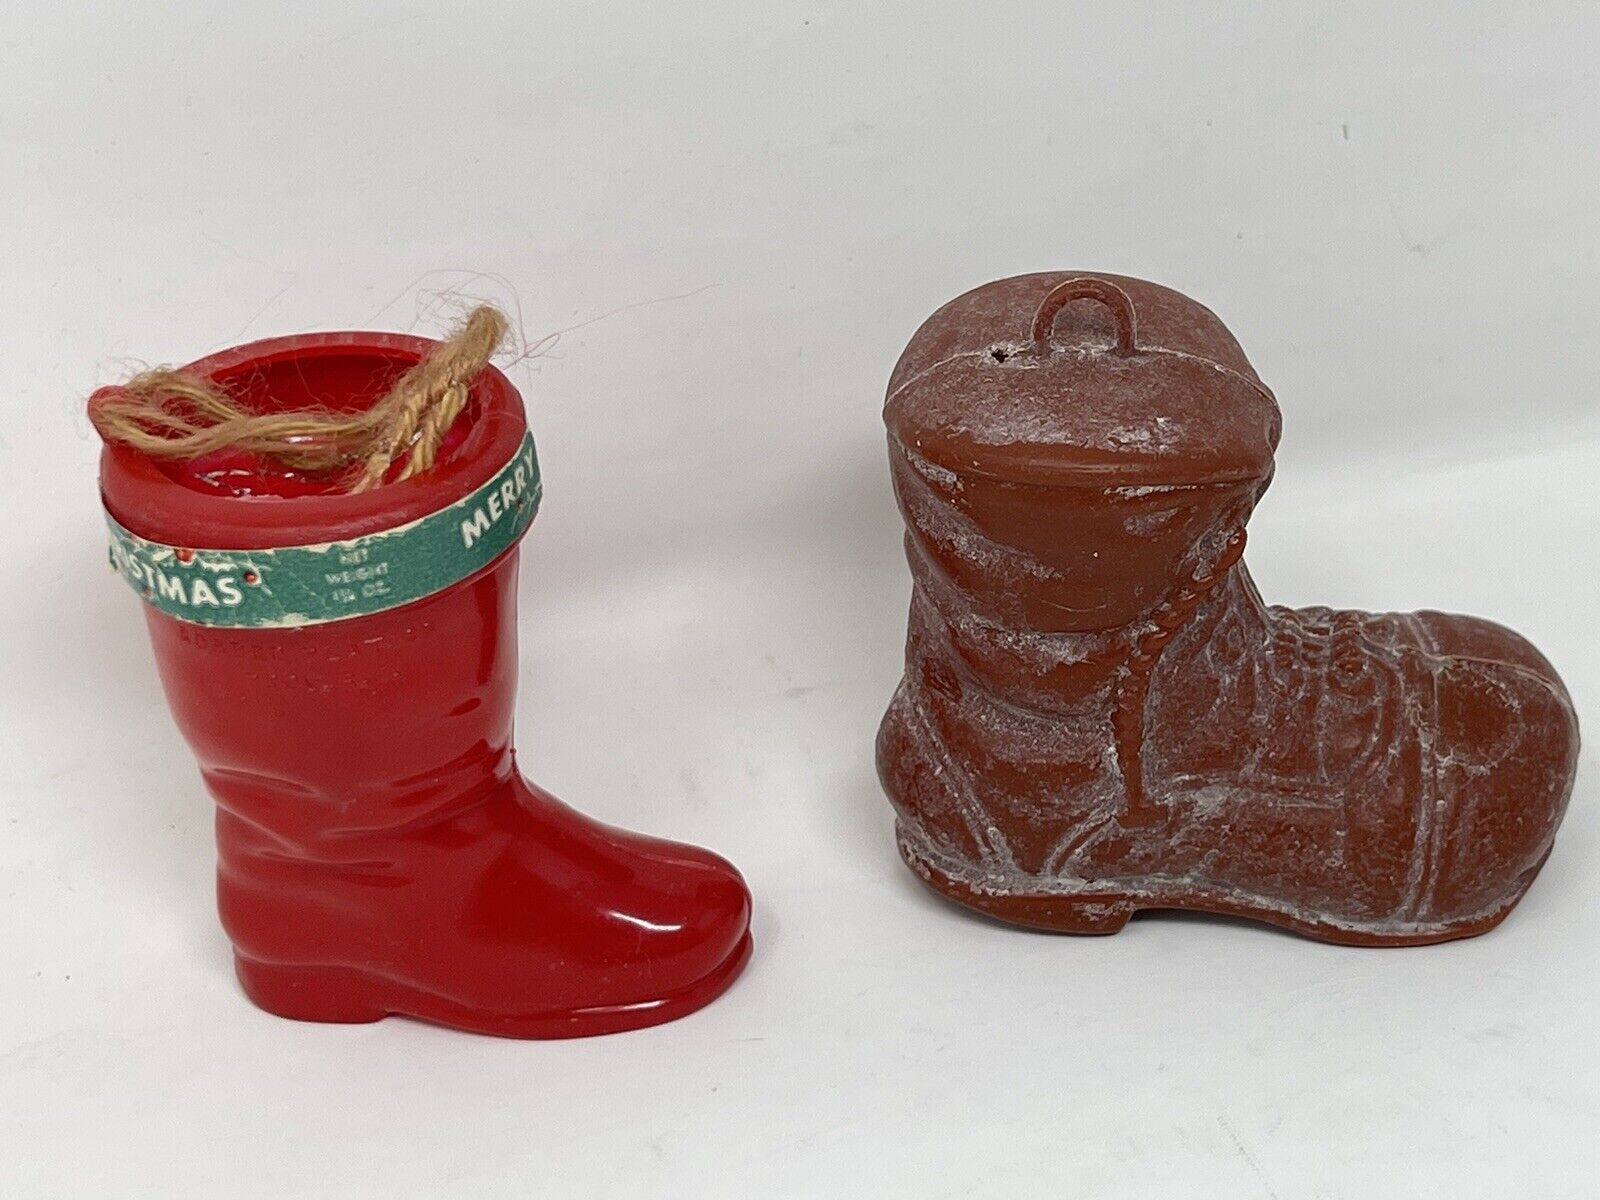 VTG 1950’s ROSBRO Red Santa Claus Boot Candy Container Christmas + Free 1 EB-204